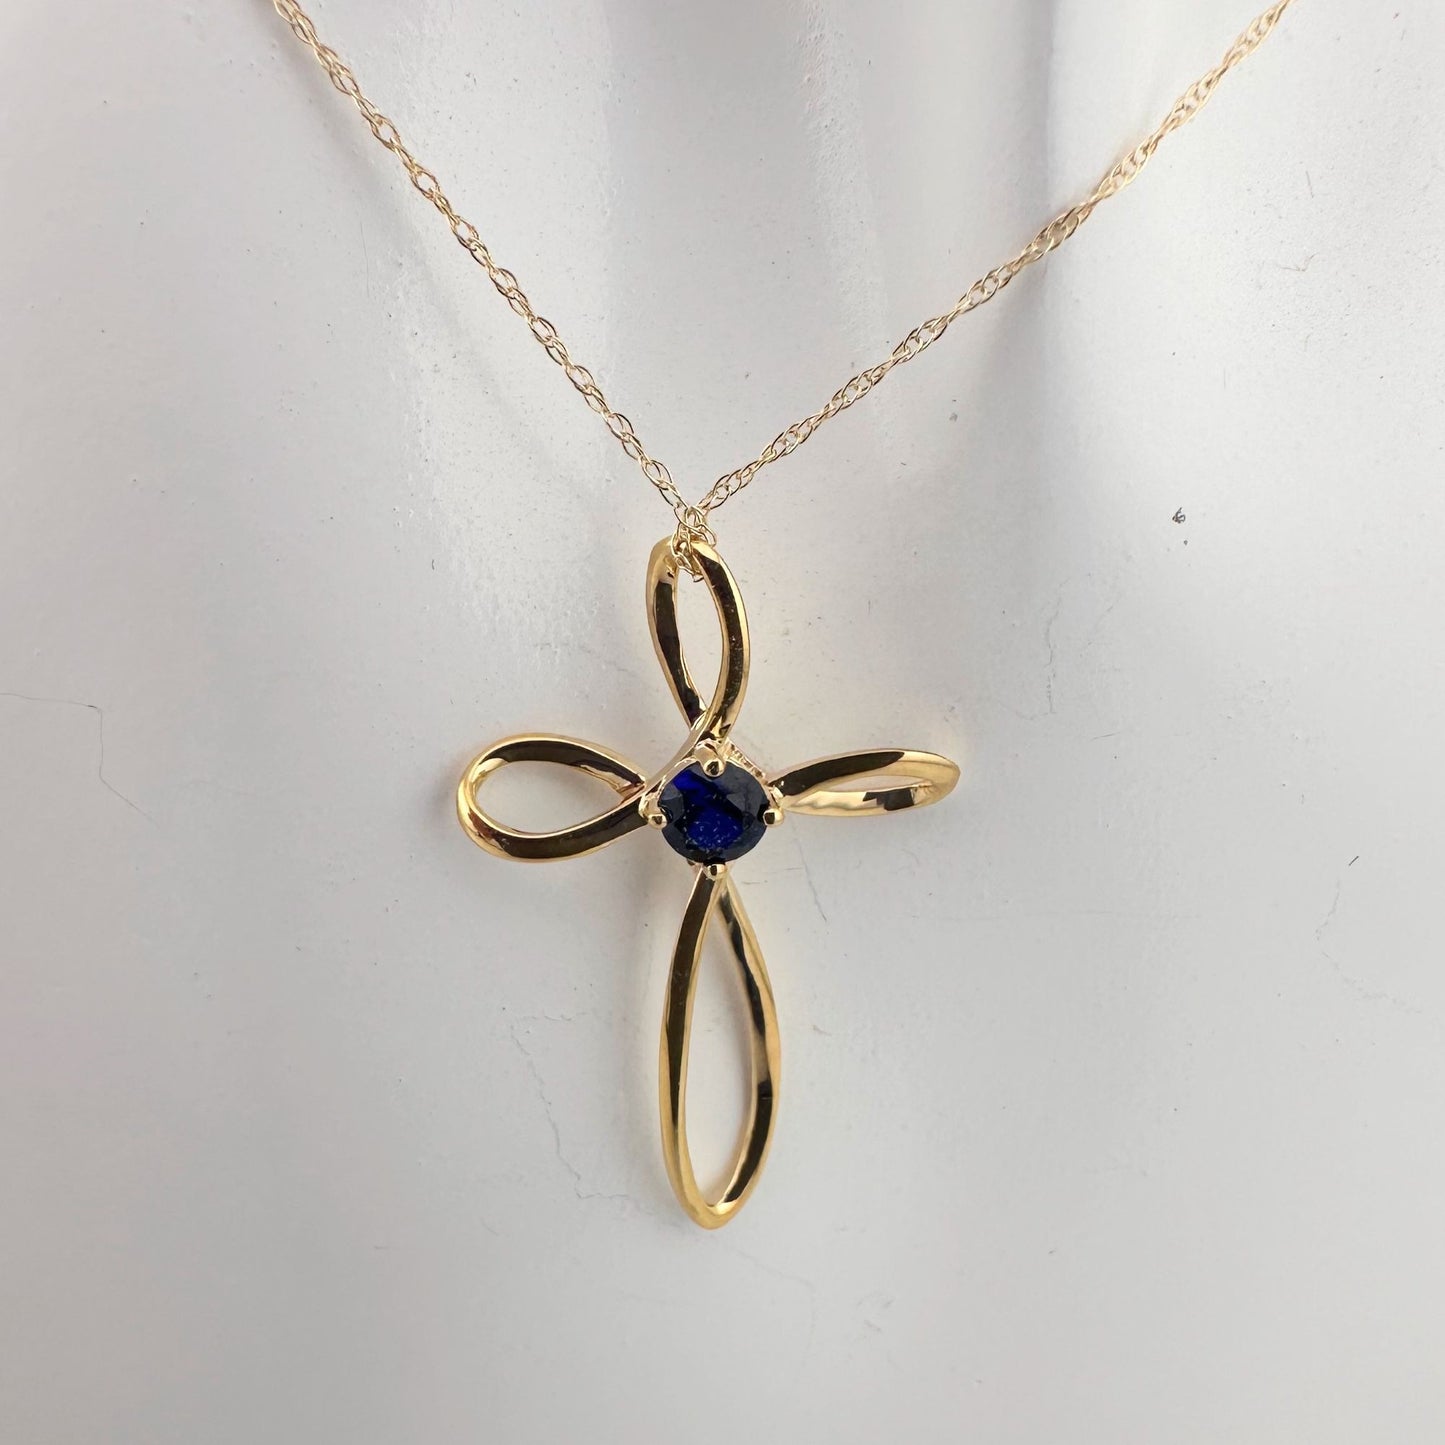 10 Kt Gold Cross Necklace - Deep Blue  Sapphire in Center with 10 Kt Gold Chain